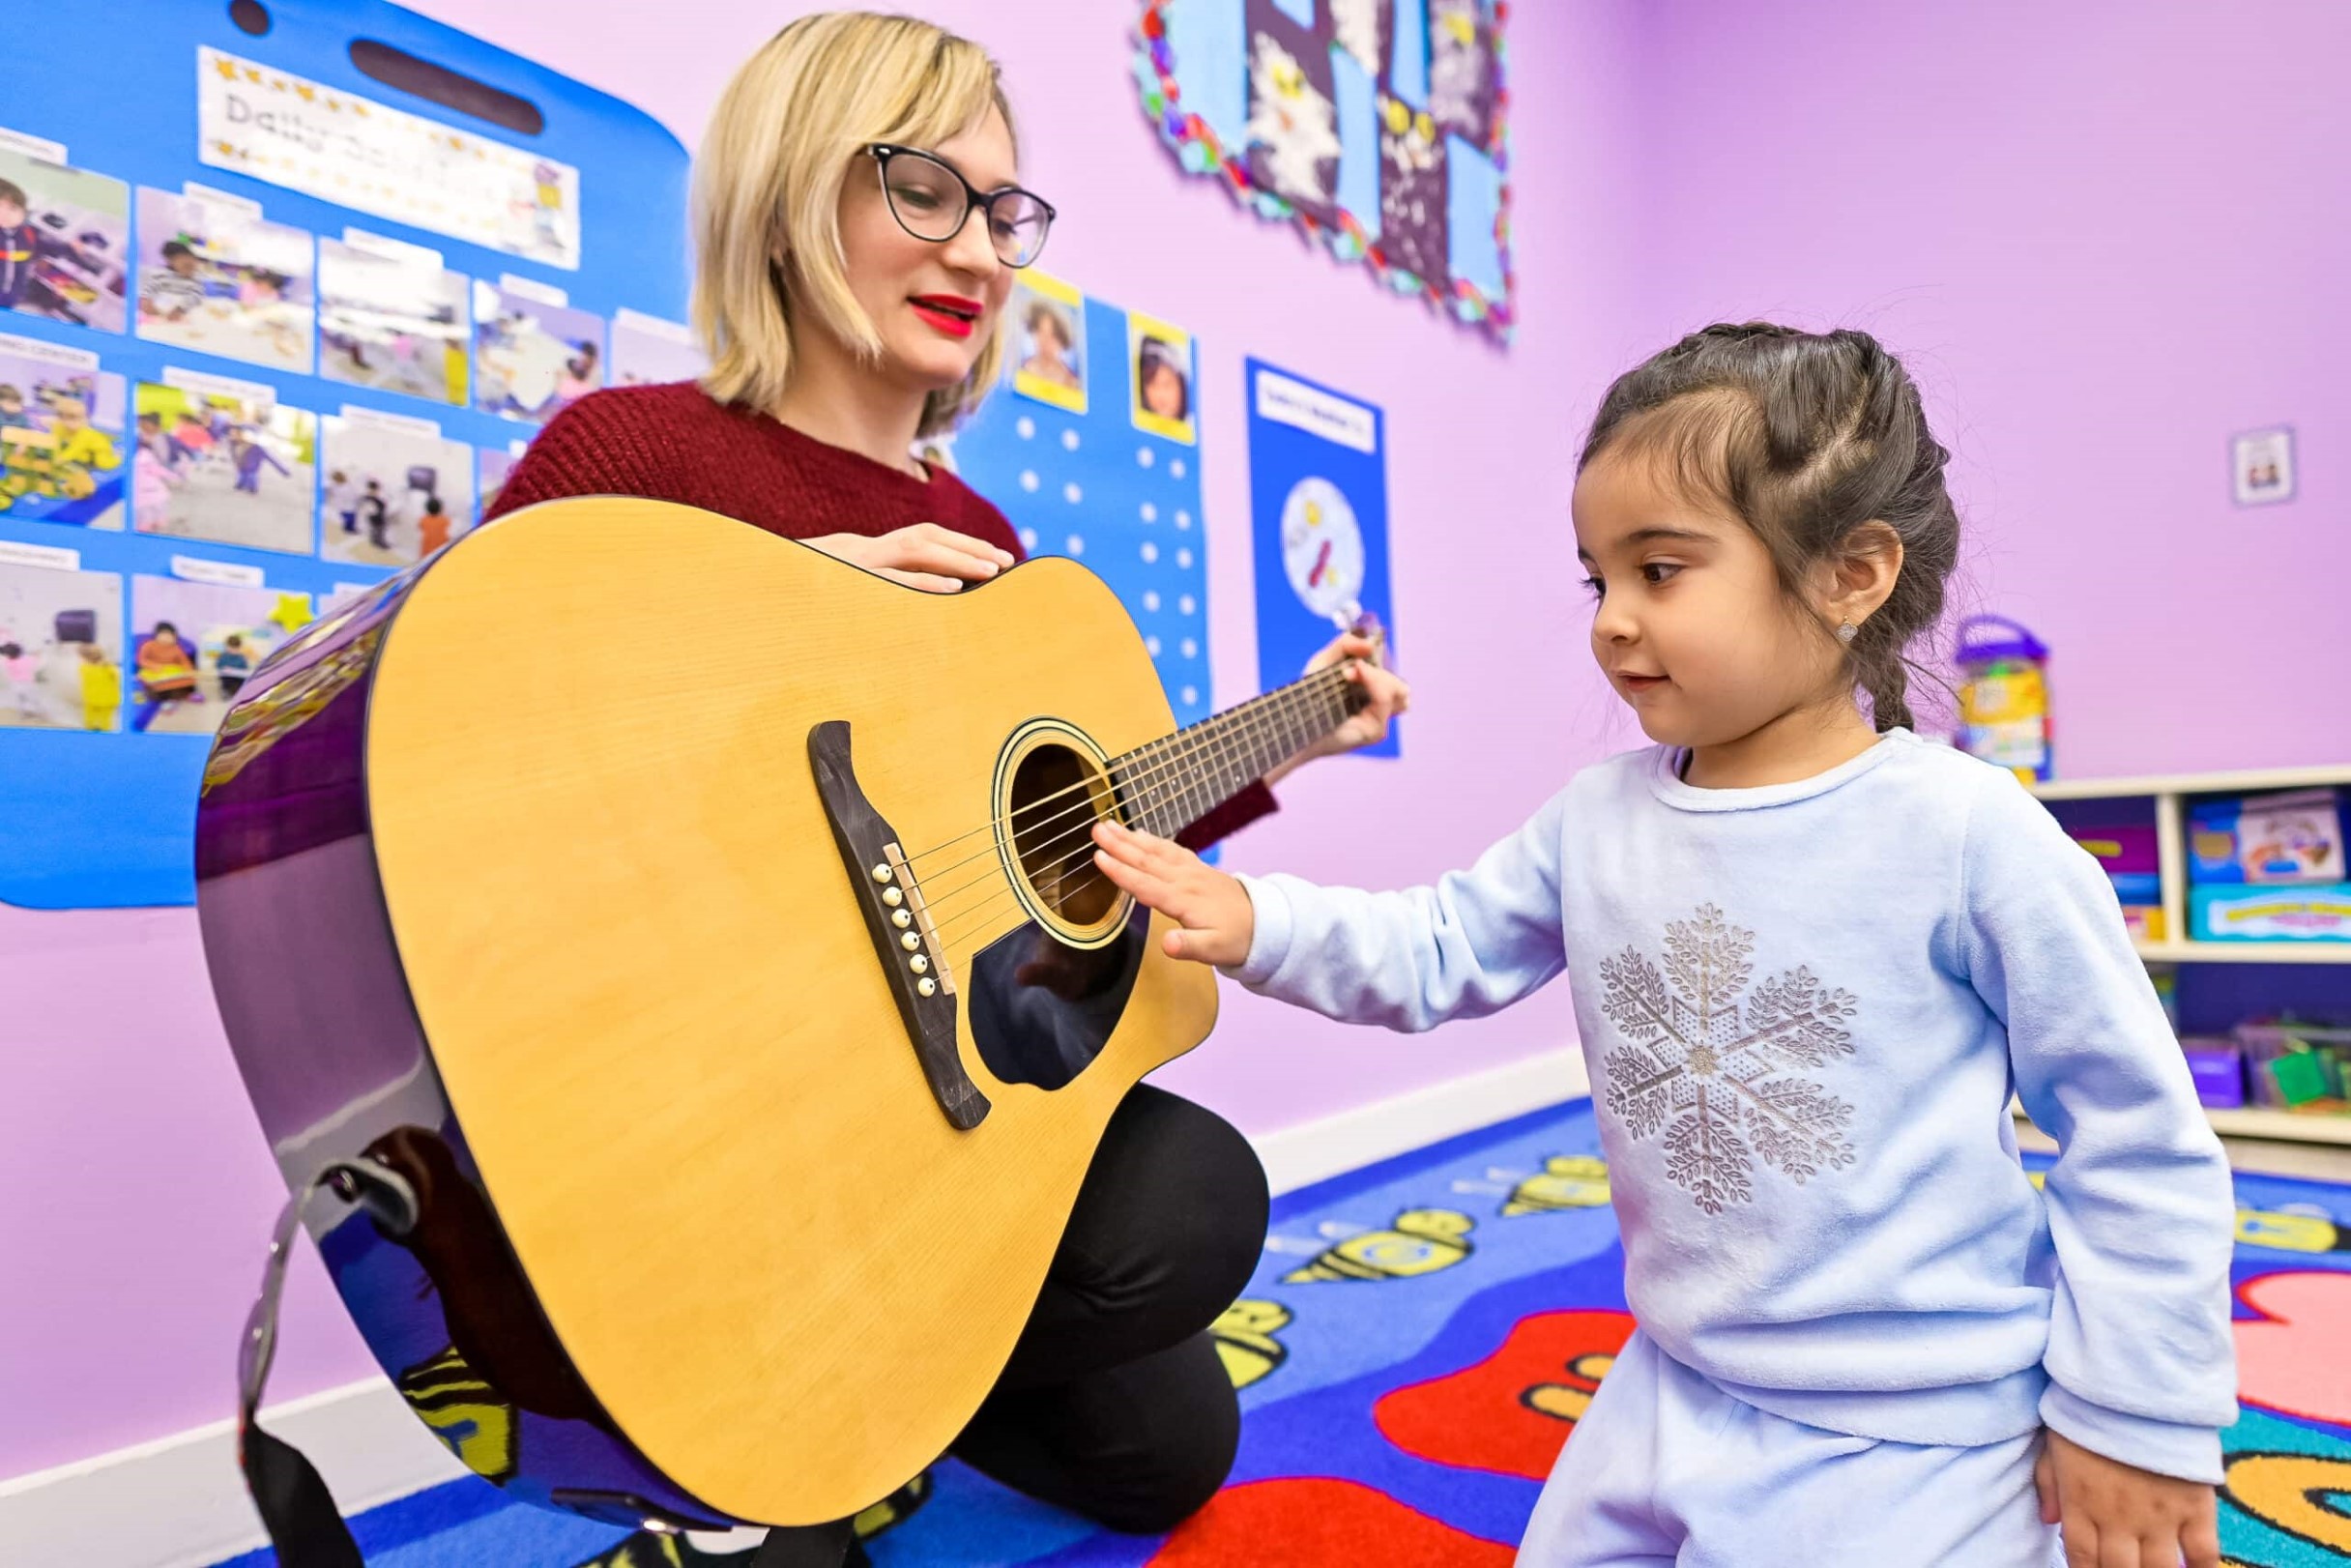 Young girl in a light blue sweater touching the strings of a guitar played by a teacher with blonde hair and glasses, in a colorful classroom setting